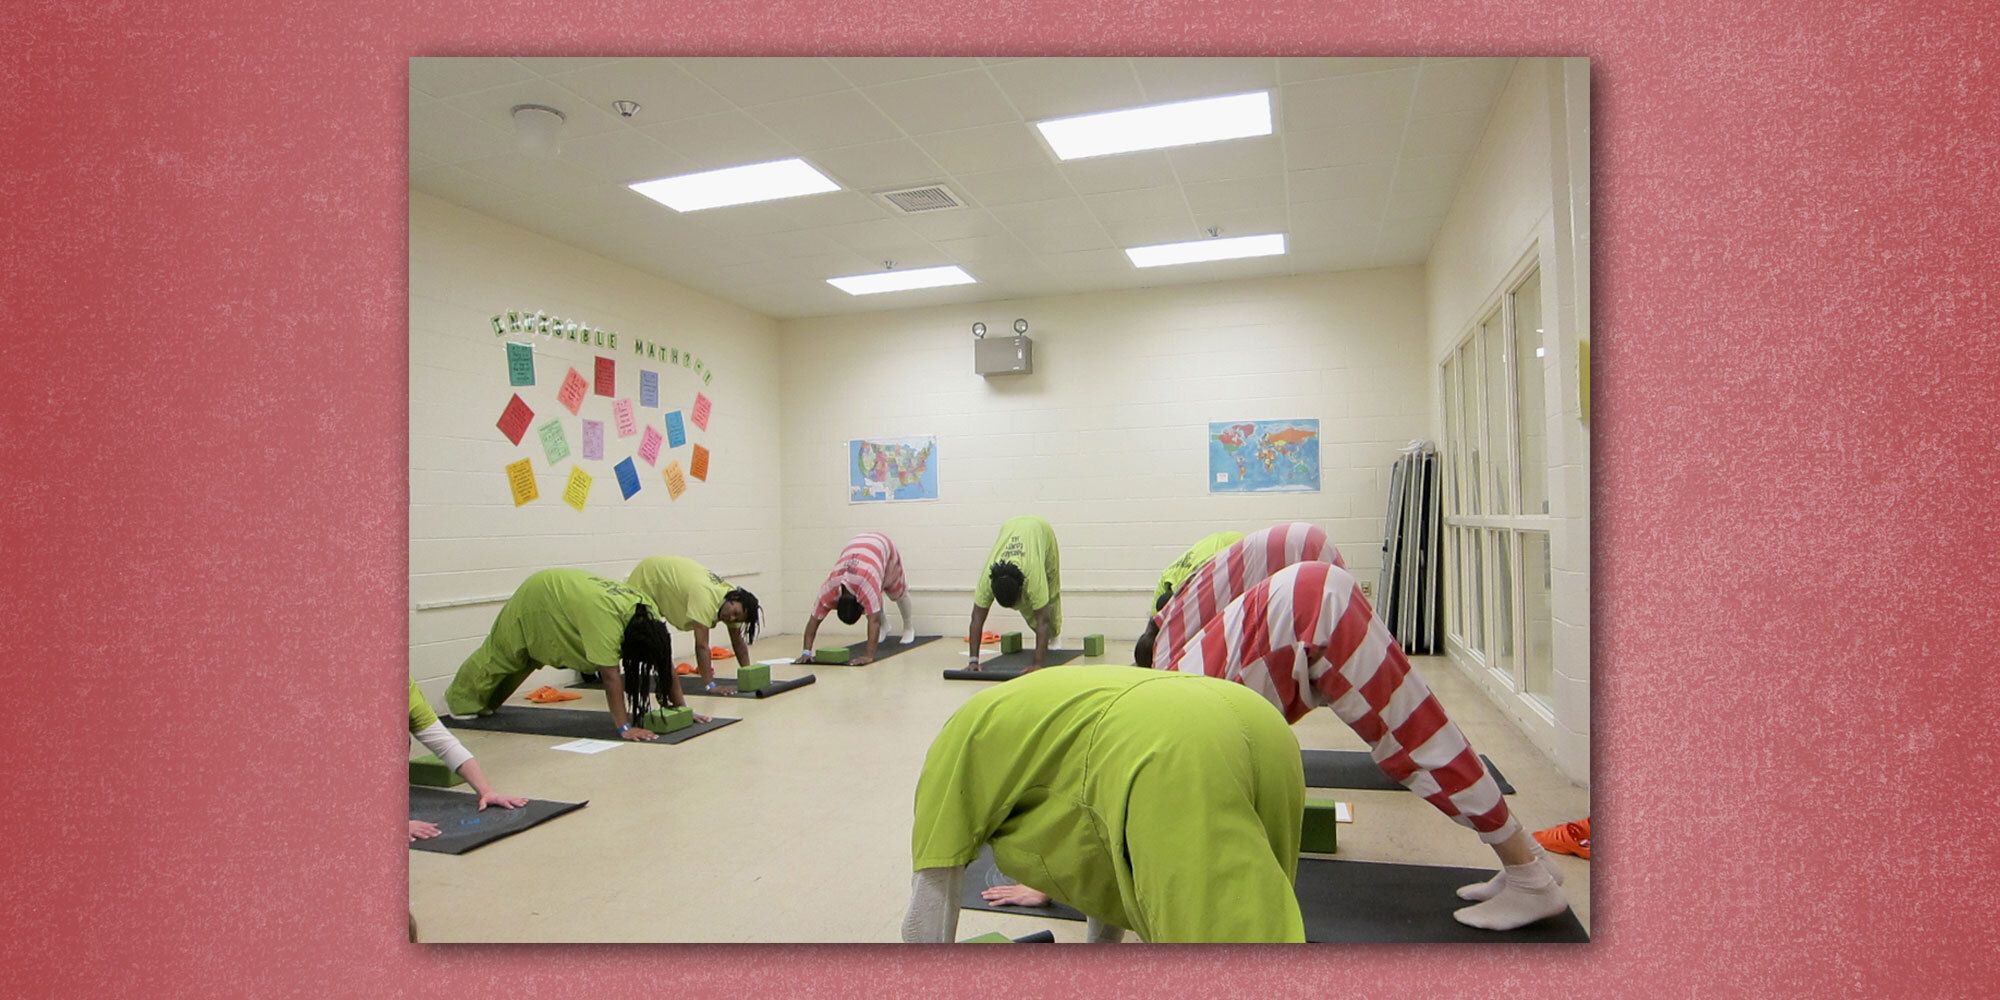 How the Prison Yoga Project Brings Movement to Incarcerated